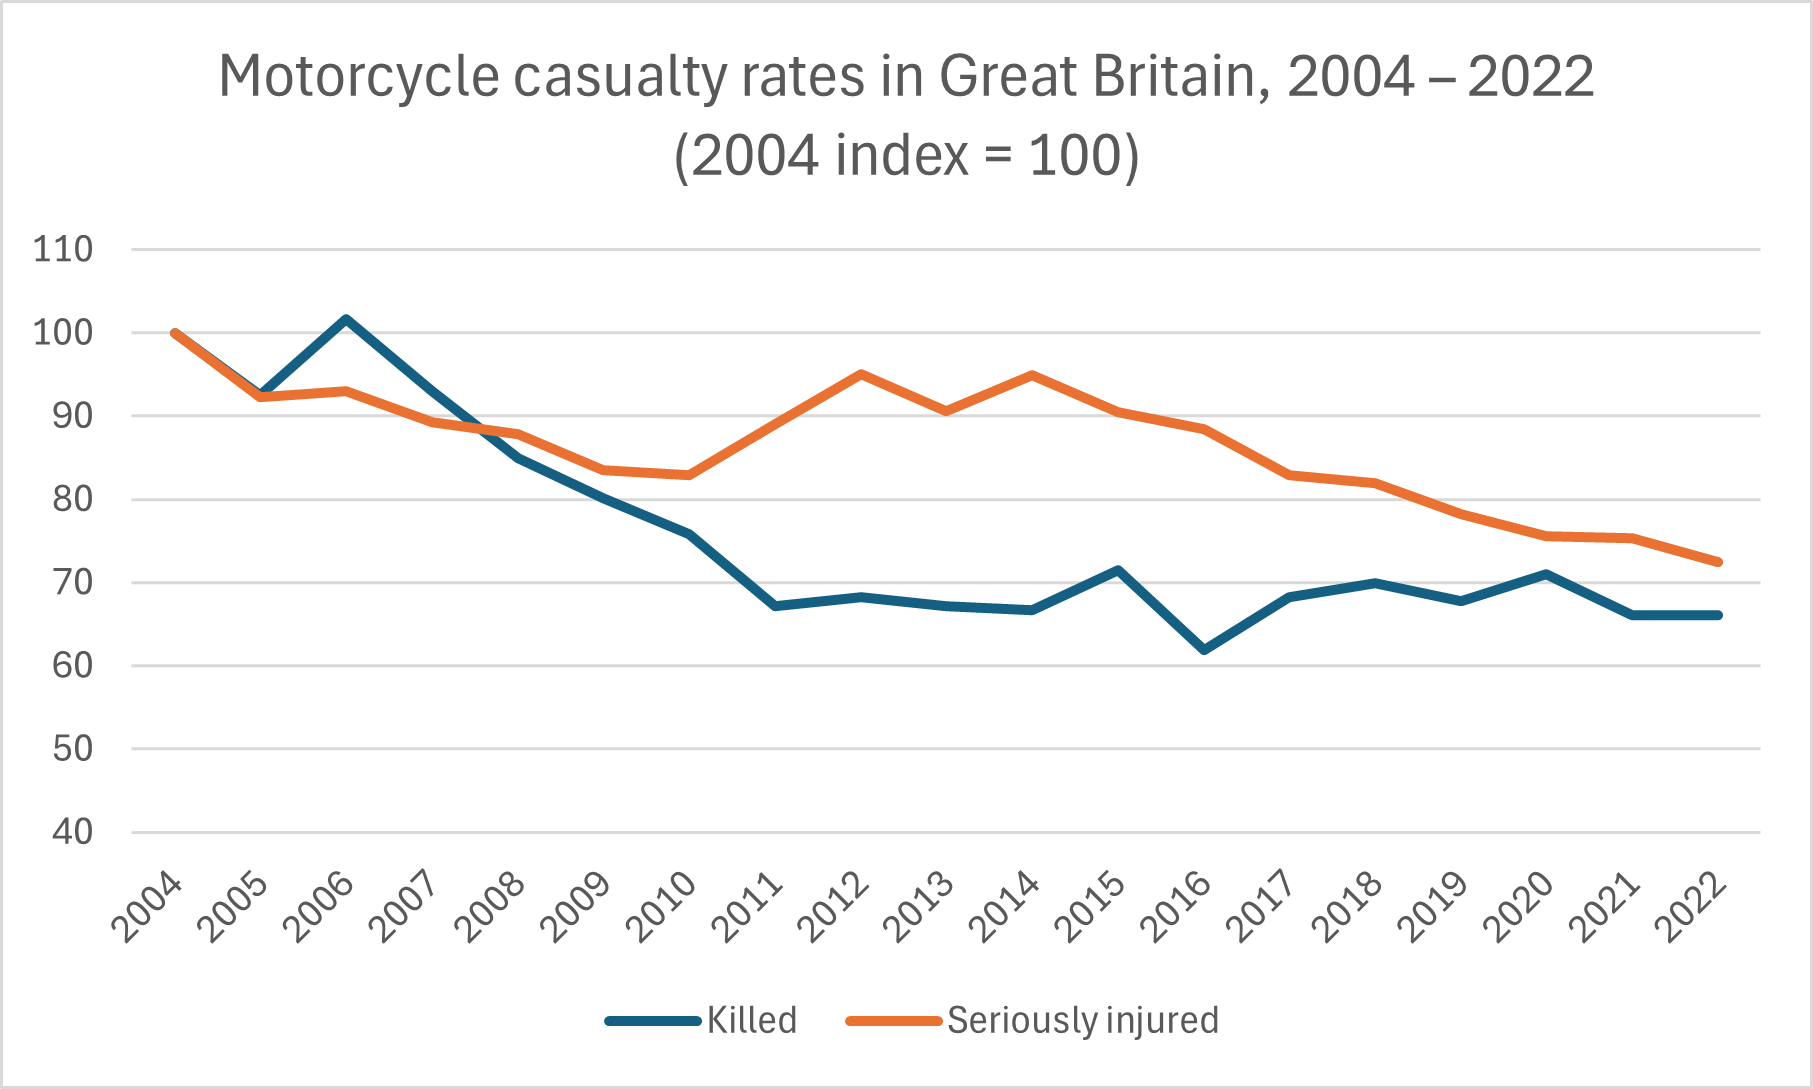 Motorcycle casualty rates 2004 - 2022